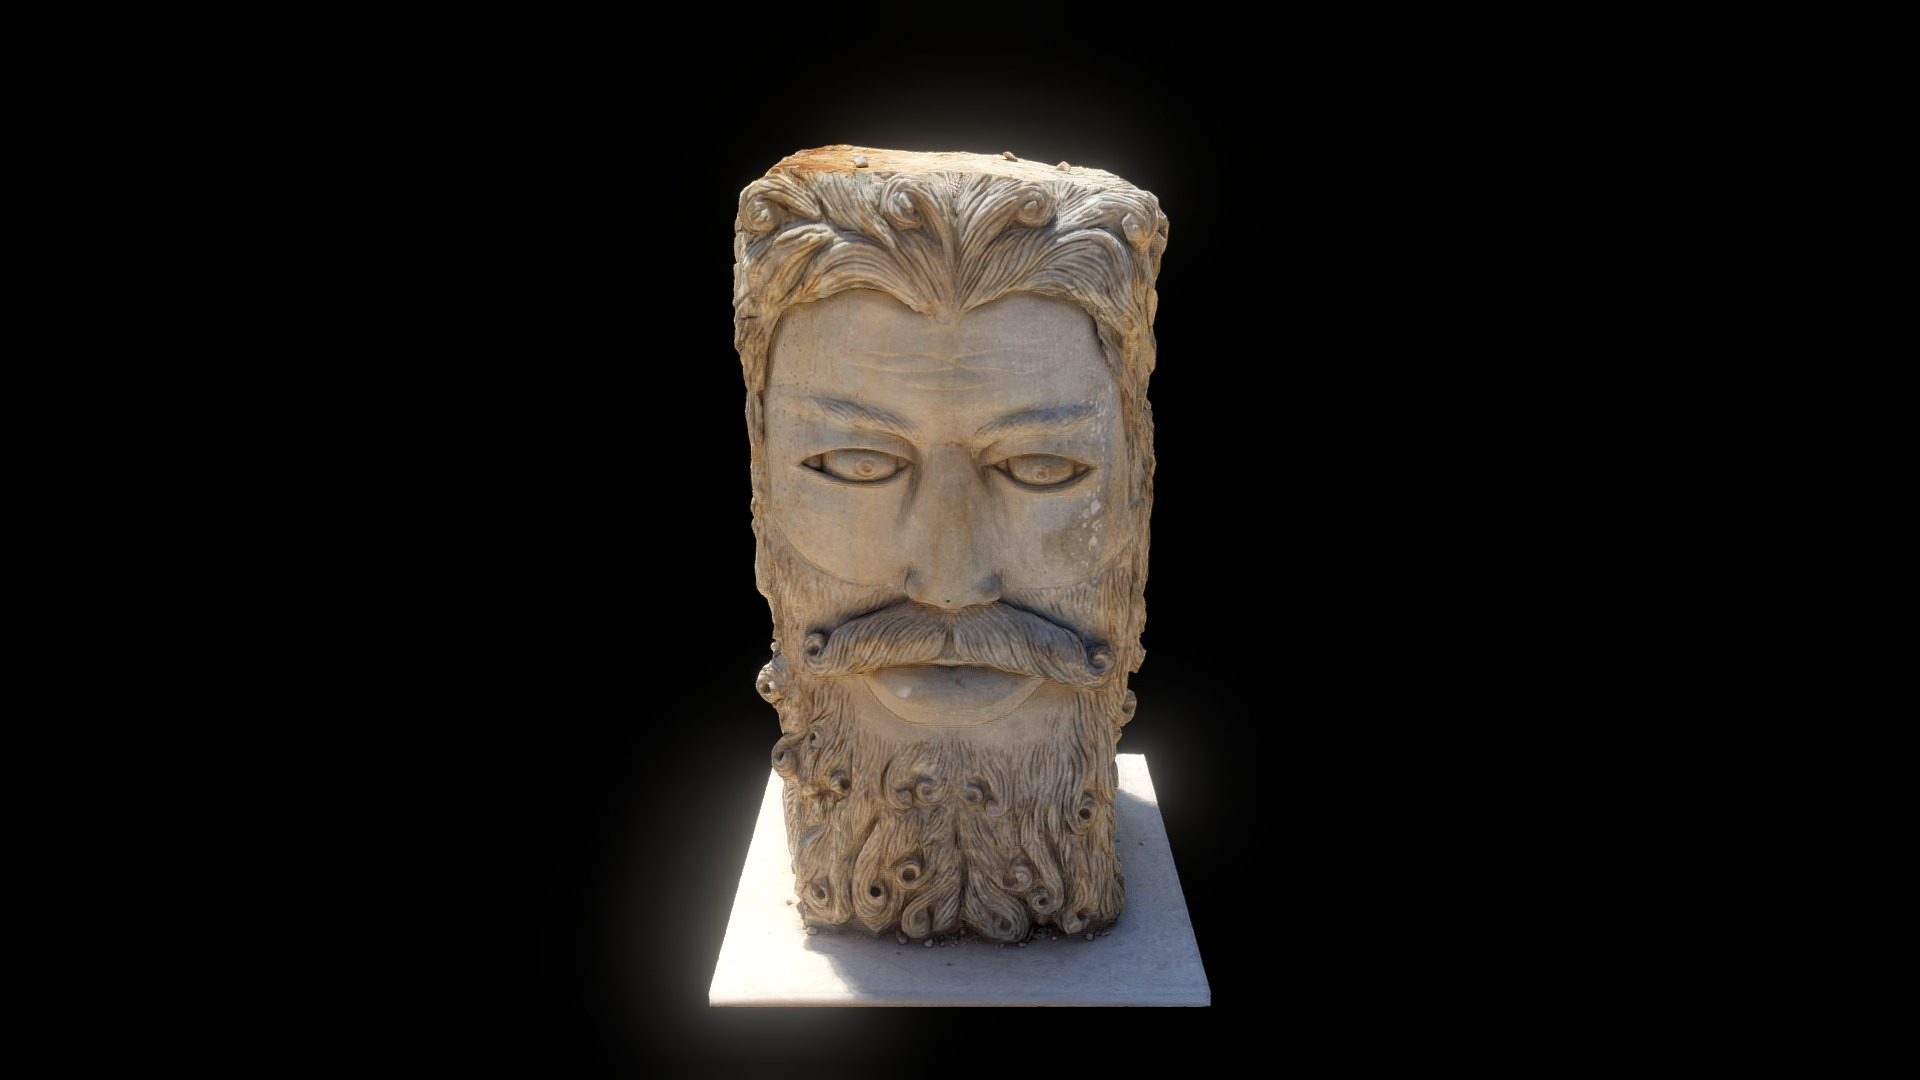 3D model UNLIT-Odysseus – Michele Valenza - This is a 3D model of the UNLIT-Odysseus - Michele Valenza. The 3D model is about a statue of a person.